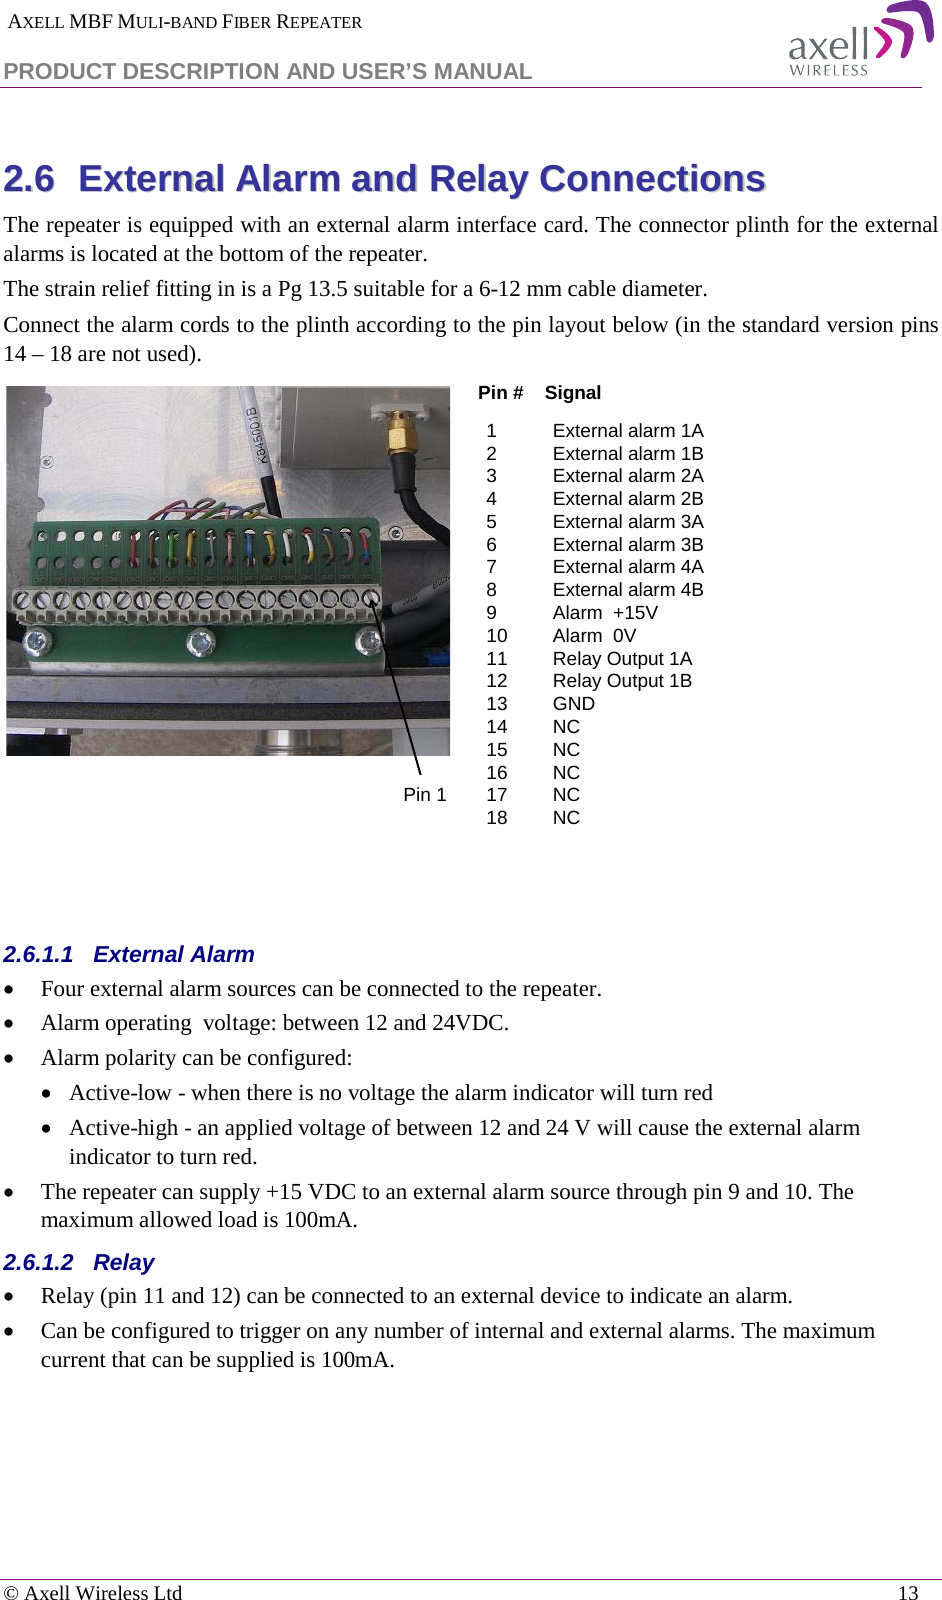  AXELL MBF MULI-BAND FIBER REPEATER PRODUCT DESCRIPTION AND USER’S MANUAL   © Axell Wireless Ltd    13 22..66  EExxtteerrnnaall  AAllaarrmm  aanndd  RReellaayy  CCoonnnneeccttiioonnss  The repeater is equipped with an external alarm interface card. The connector plinth for the external alarms is located at the bottom of the repeater.  The strain relief fitting in is a Pg 13.5 suitable for a 6-12 mm cable diameter. Connect the alarm cords to the plinth according to the pin layout below (in the standard version pins 14 – 18 are not used).    2.6.1.1  External Alarm  • Four external alarm sources can be connected to the repeater. • Alarm operating  voltage: between 12 and 24VDC.  • Alarm polarity can be configured:  • Active-low - when there is no voltage the alarm indicator will turn red • Active-high - an applied voltage of between 12 and 24 V will cause the external alarm indicator to turn red. • The repeater can supply +15 VDC to an external alarm source through pin 9 and 10. The maximum allowed load is 100mA. 2.6.1.2  Relay • Relay (pin 11 and 12) can be connected to an external device to indicate an alarm. • Can be configured to trigger on any number of internal and external alarms. The maximum current that can be supplied is 100mA.    1External alarm 1A 2External alarm 1B3External alarm 2A 4External alarm 2B 5External alarm 3A 6External alarm 3B 7External alarm 4A 8External alarm 4B 9Alarm  +15V 10 Alarm  0V 11 Relay Output 1A  12 Relay Output 1B13 GND14 NC15 NC16 NC17 NC18 NCPin #    SignalPin 1